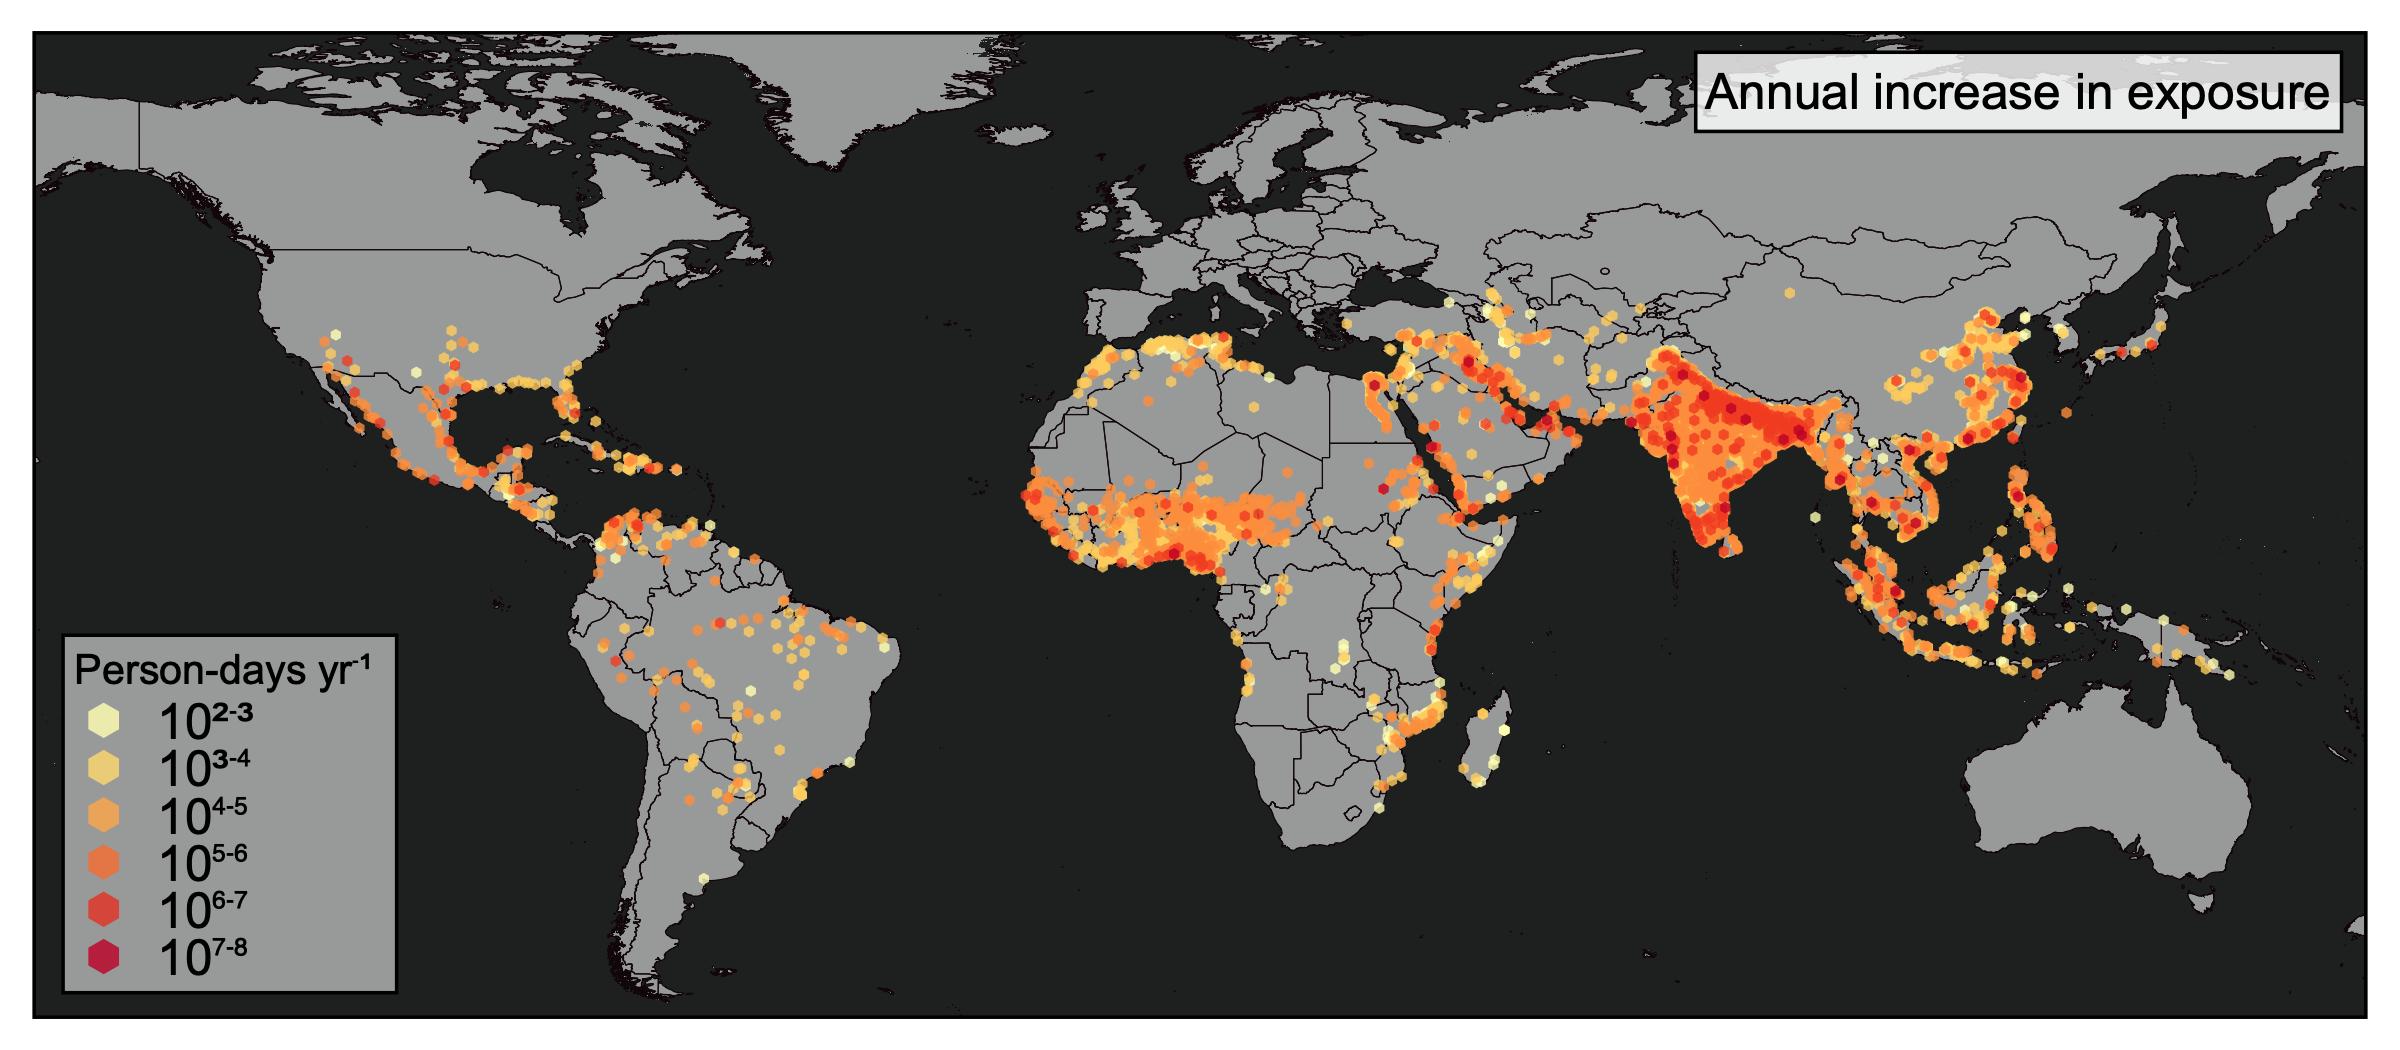 Global map showing areas of extreme heat exposure in red/orange.